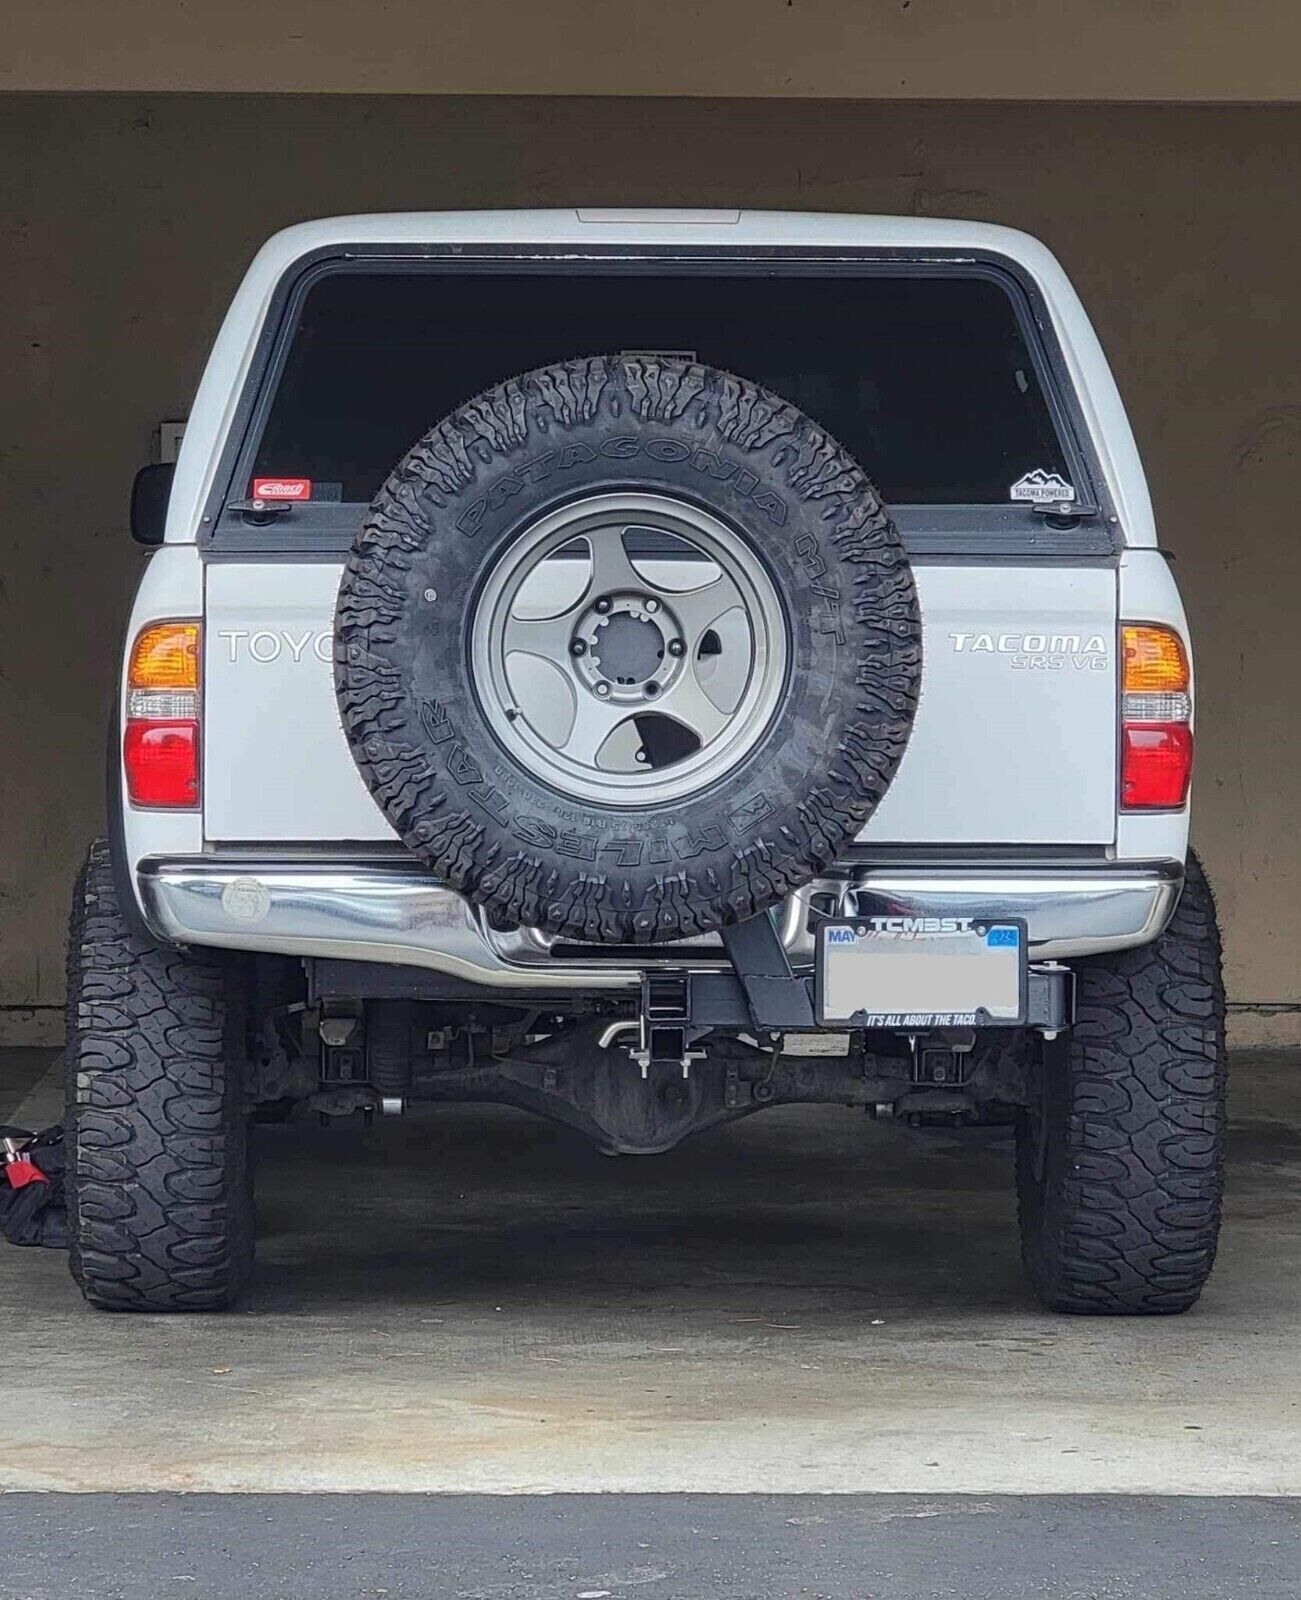 custom spare tire carrier fits Jeep crv 4runner tacoma element more 5x114 6x139